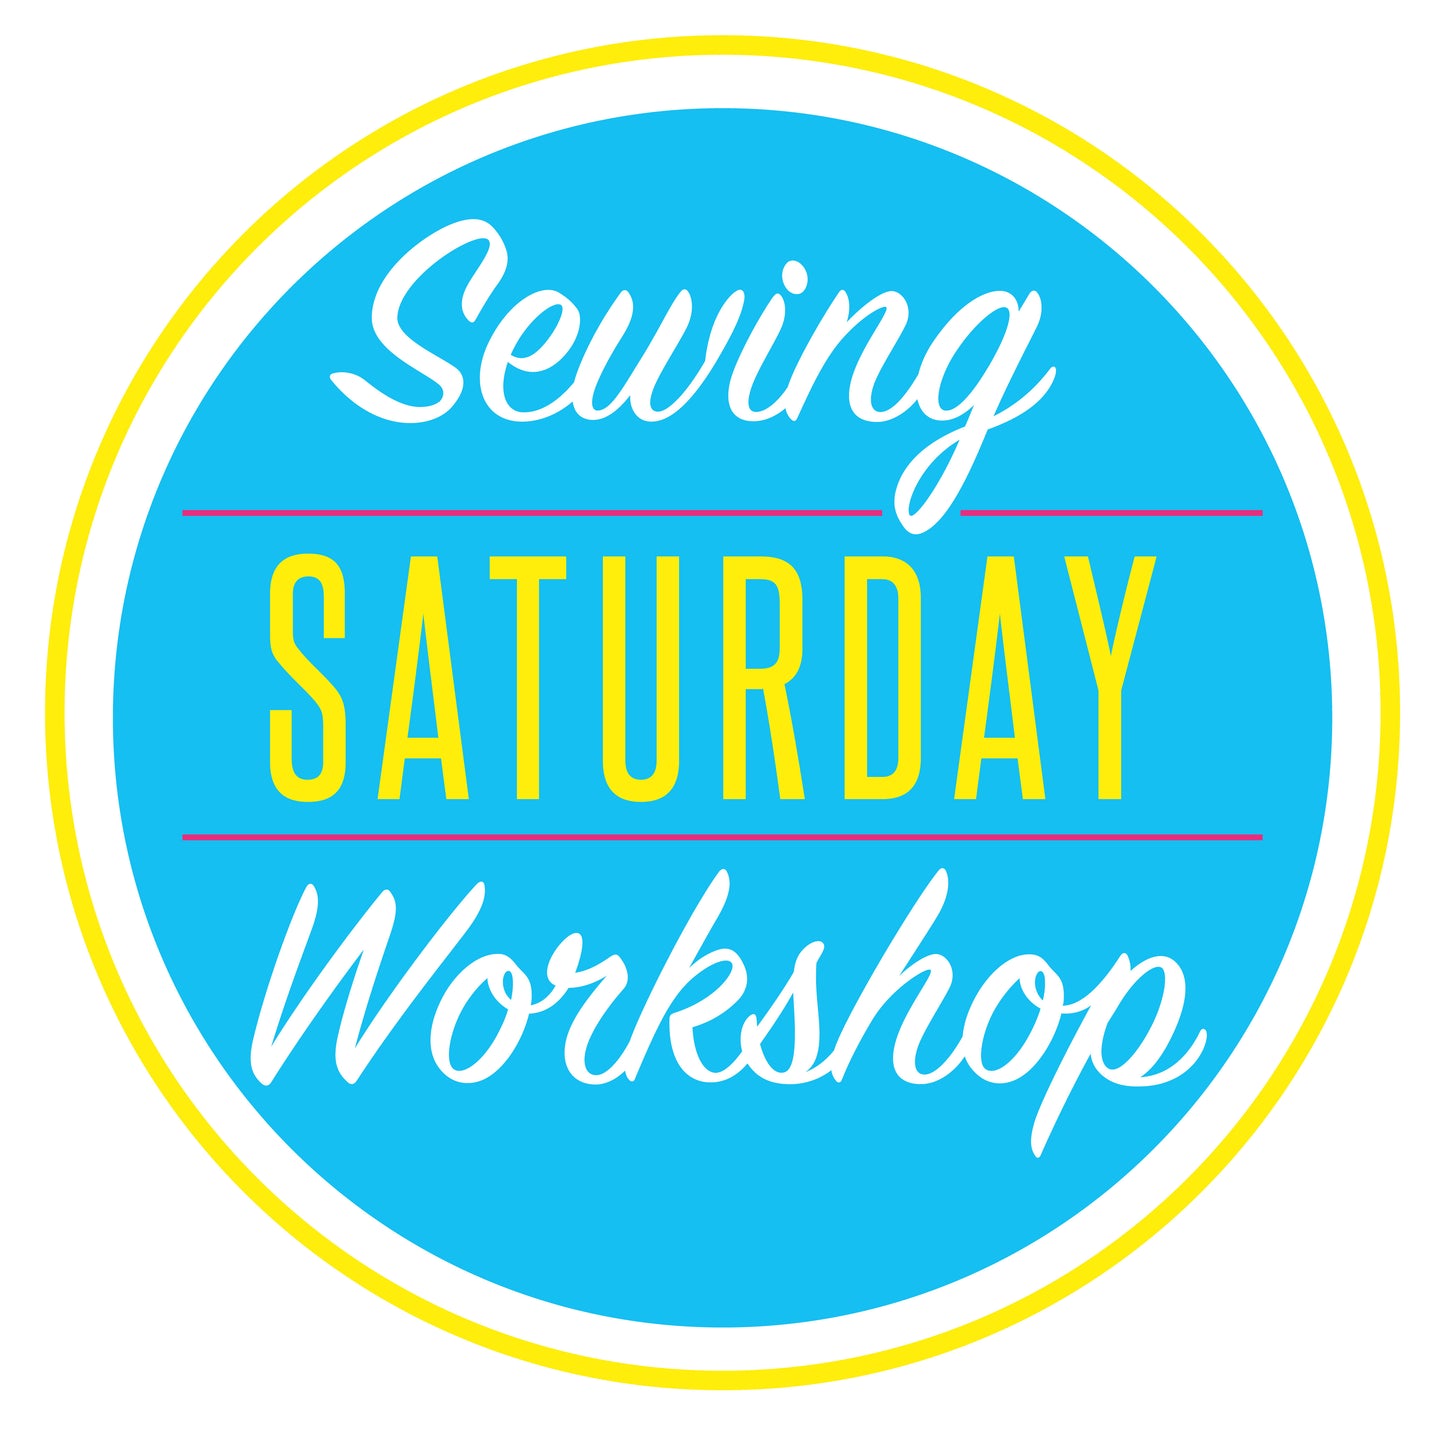 Sewing Workshop: Saturday, August 3, 9am-3pm